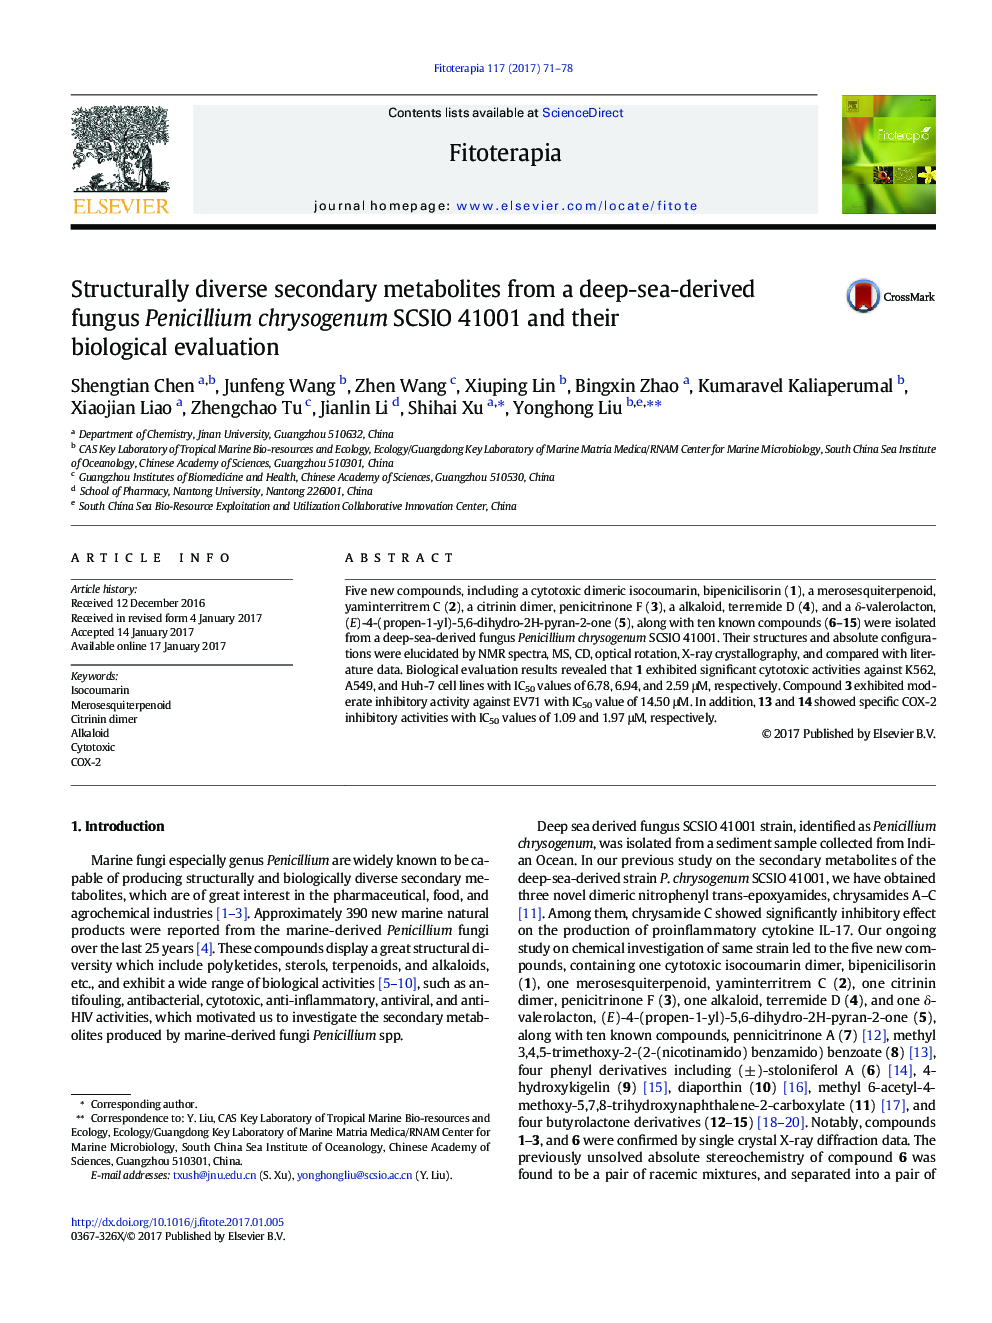 Structurally diverse secondary metabolites from a deep-sea-derived fungus Penicillium chrysogenum SCSIO 41001 and their biological evaluation